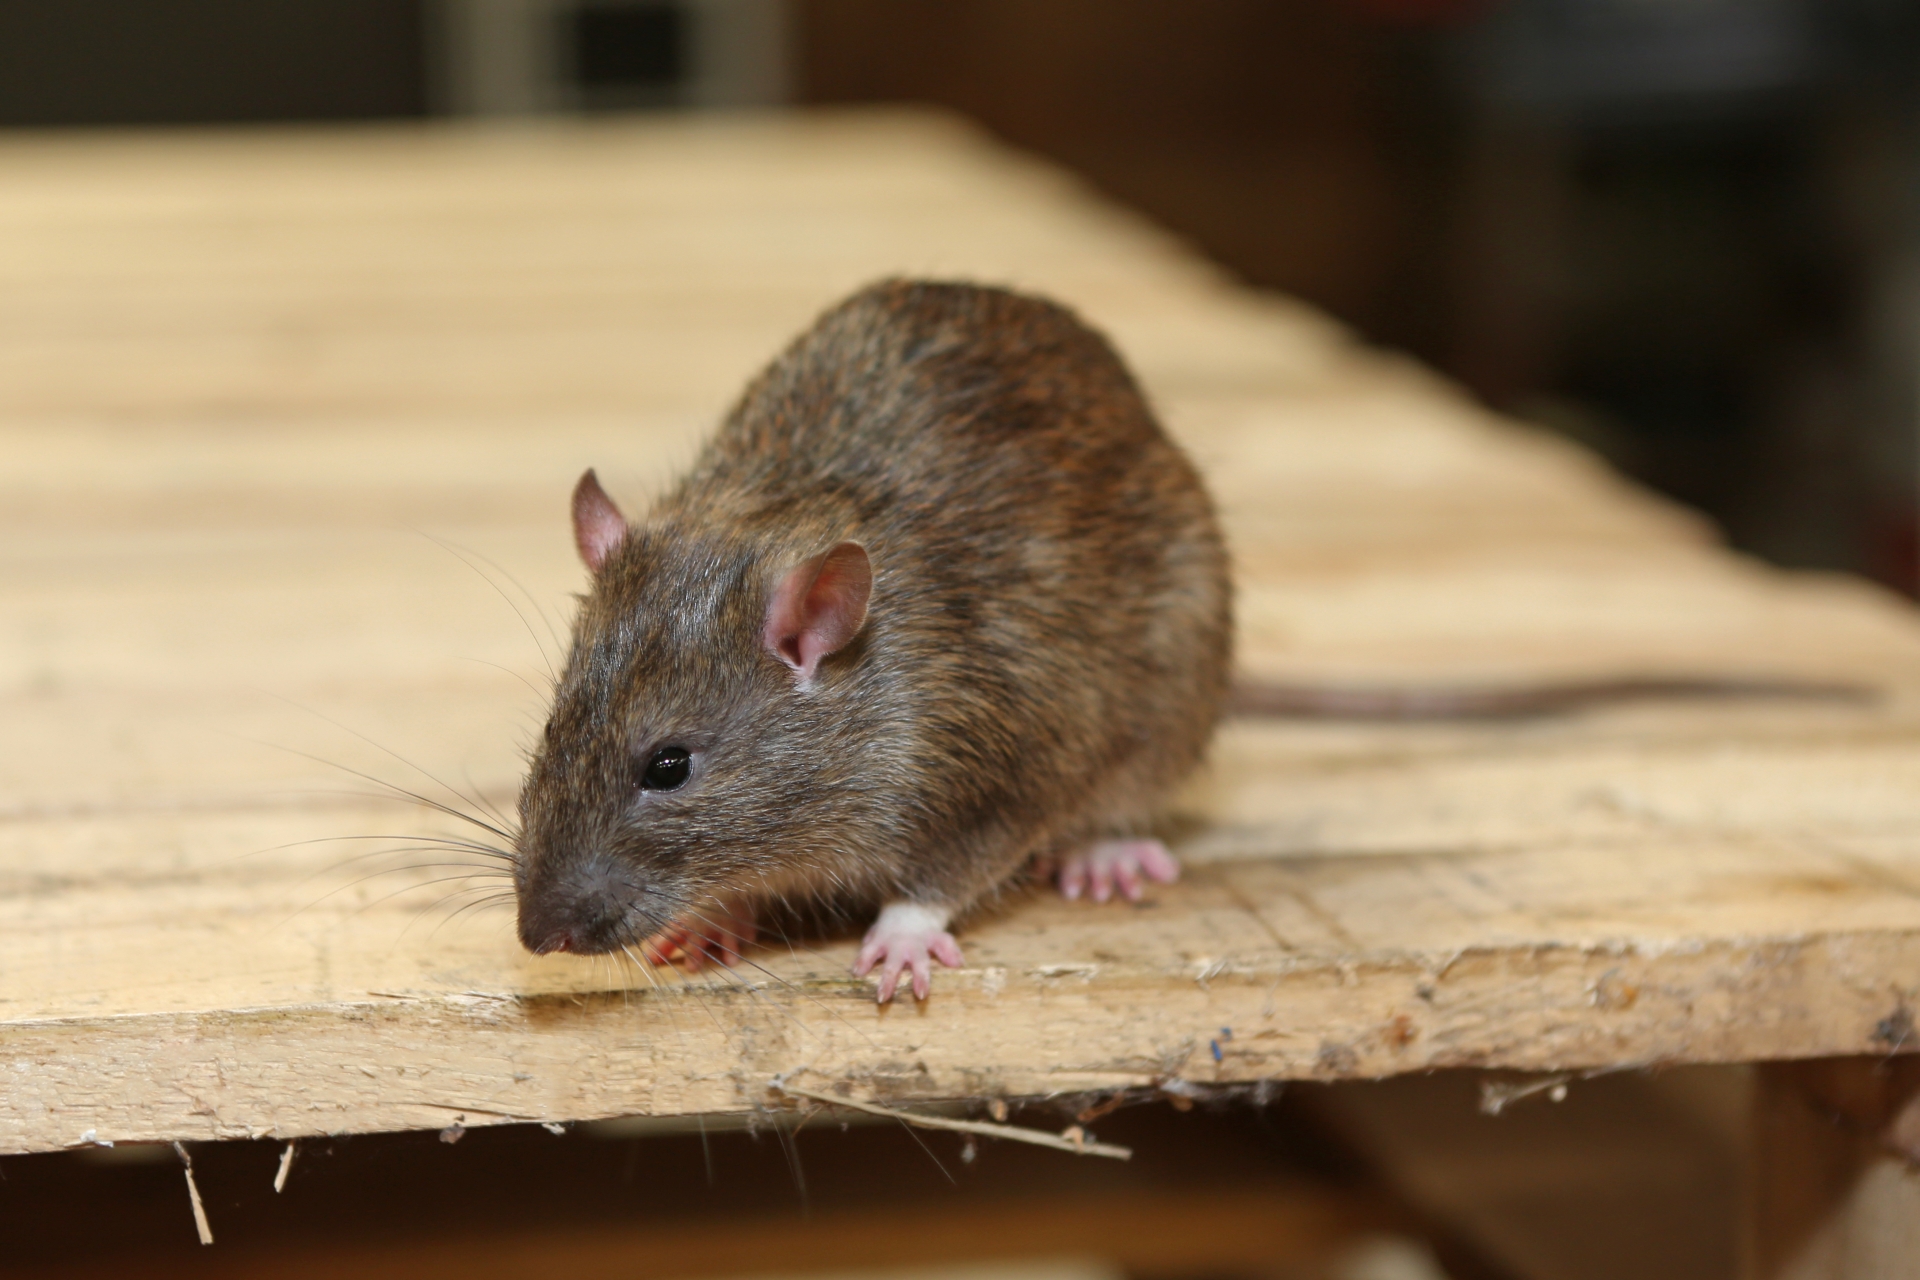 Rat Control, Pest Control in London. Call Now 020 3519 0469